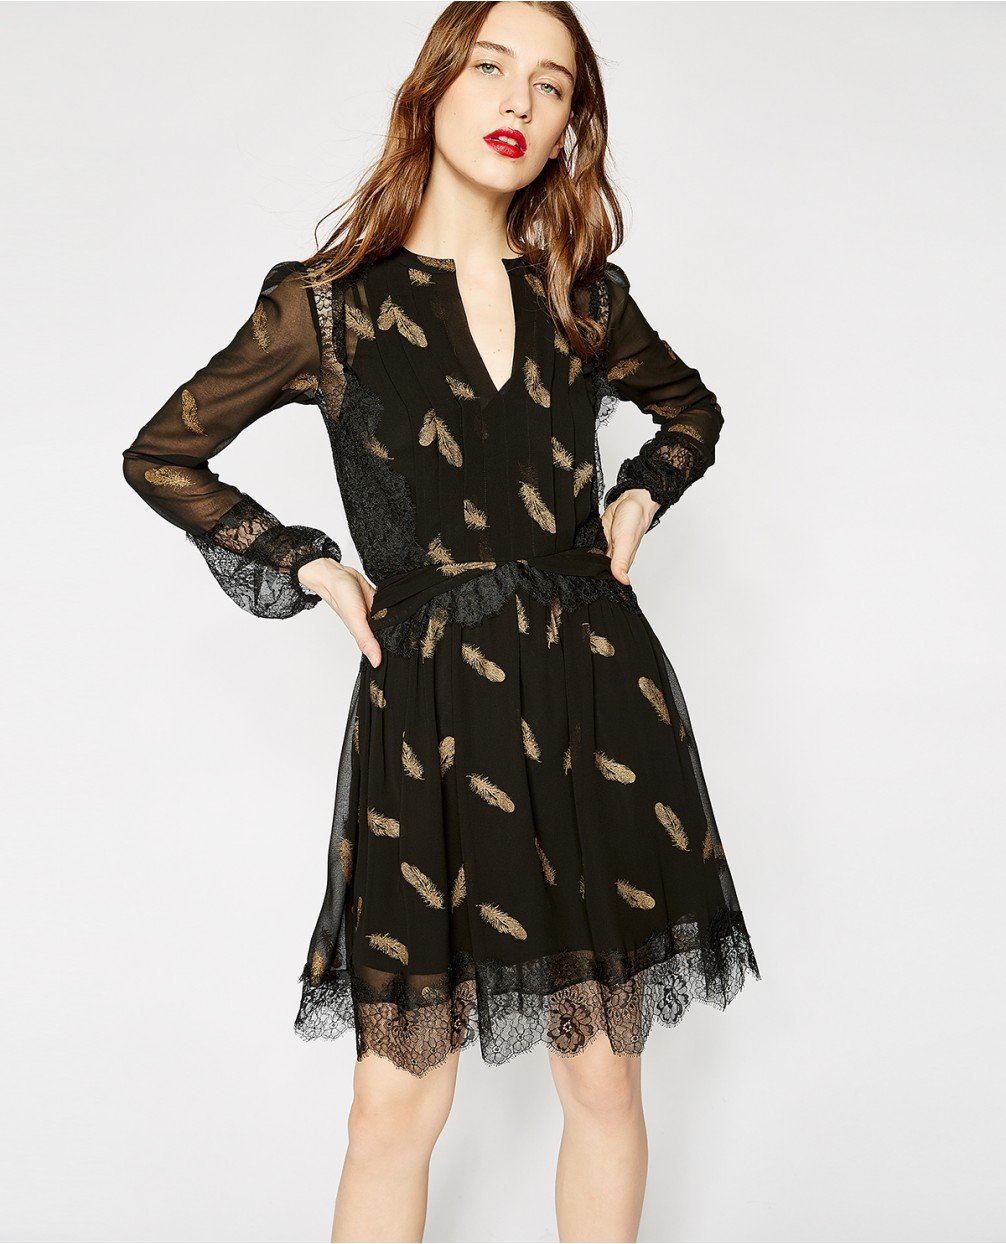 The Kooples Lace Dress with Feather Print.jpg